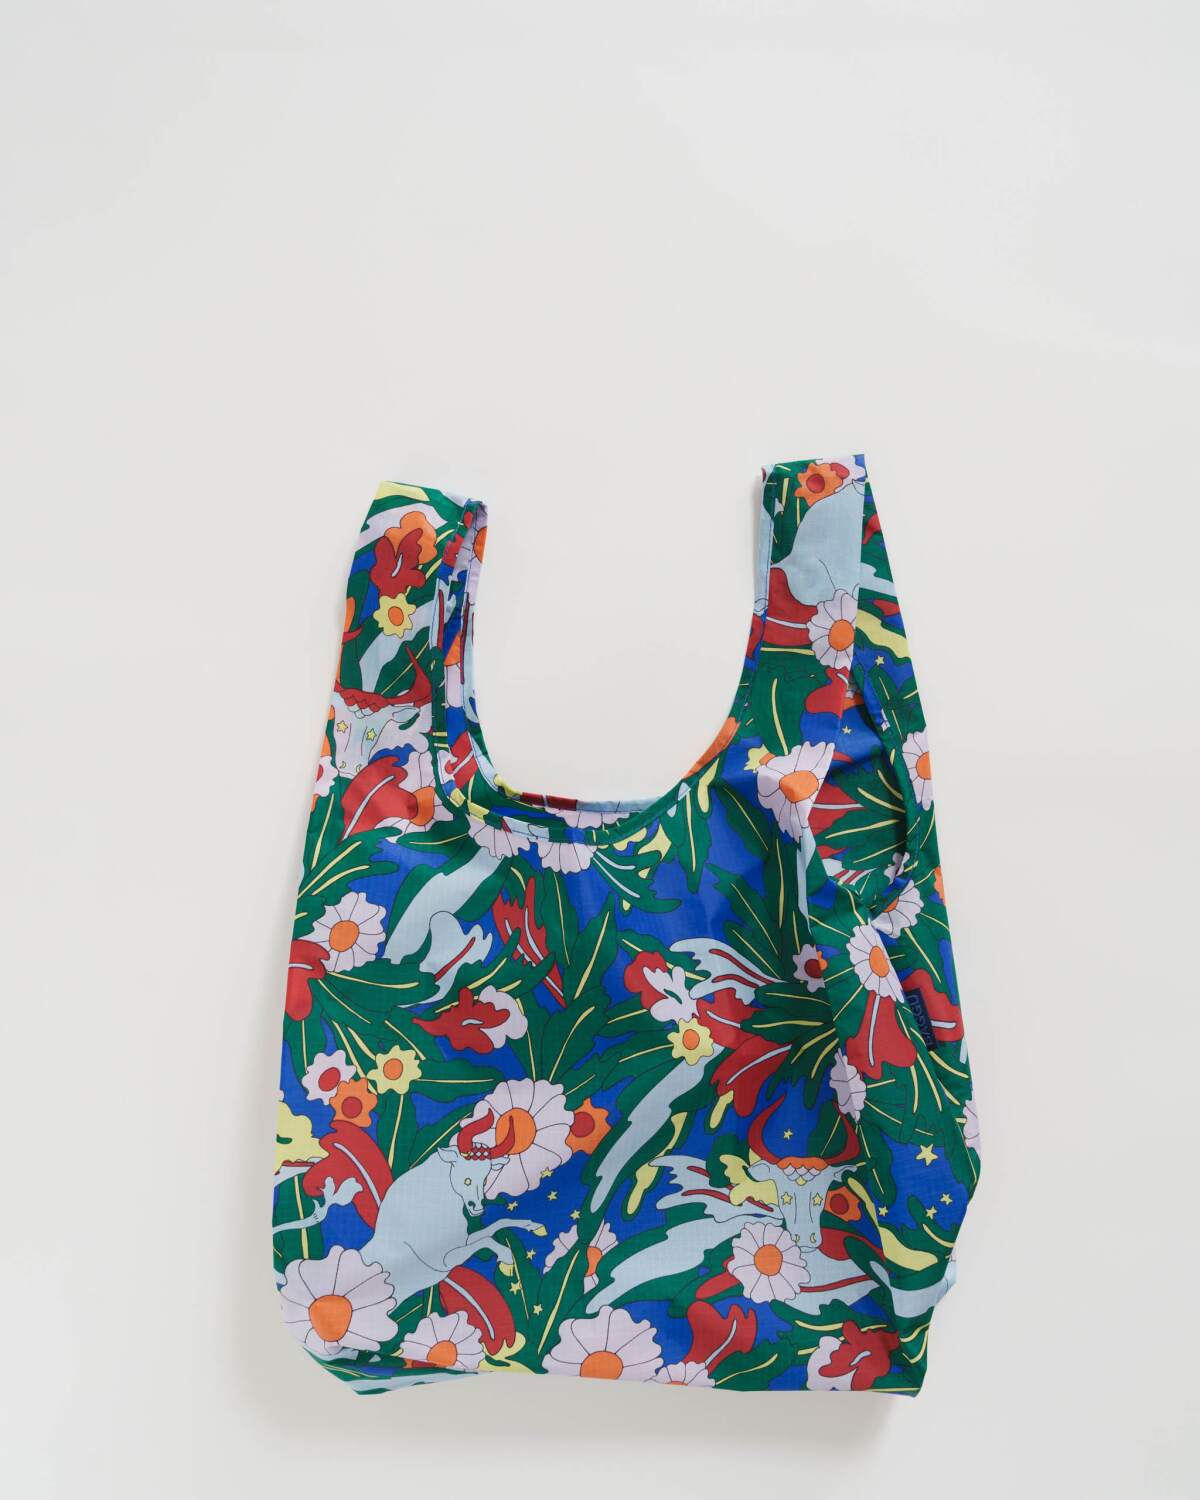 A Taurus tote from the Baggu reusable zodiac collection. $12.